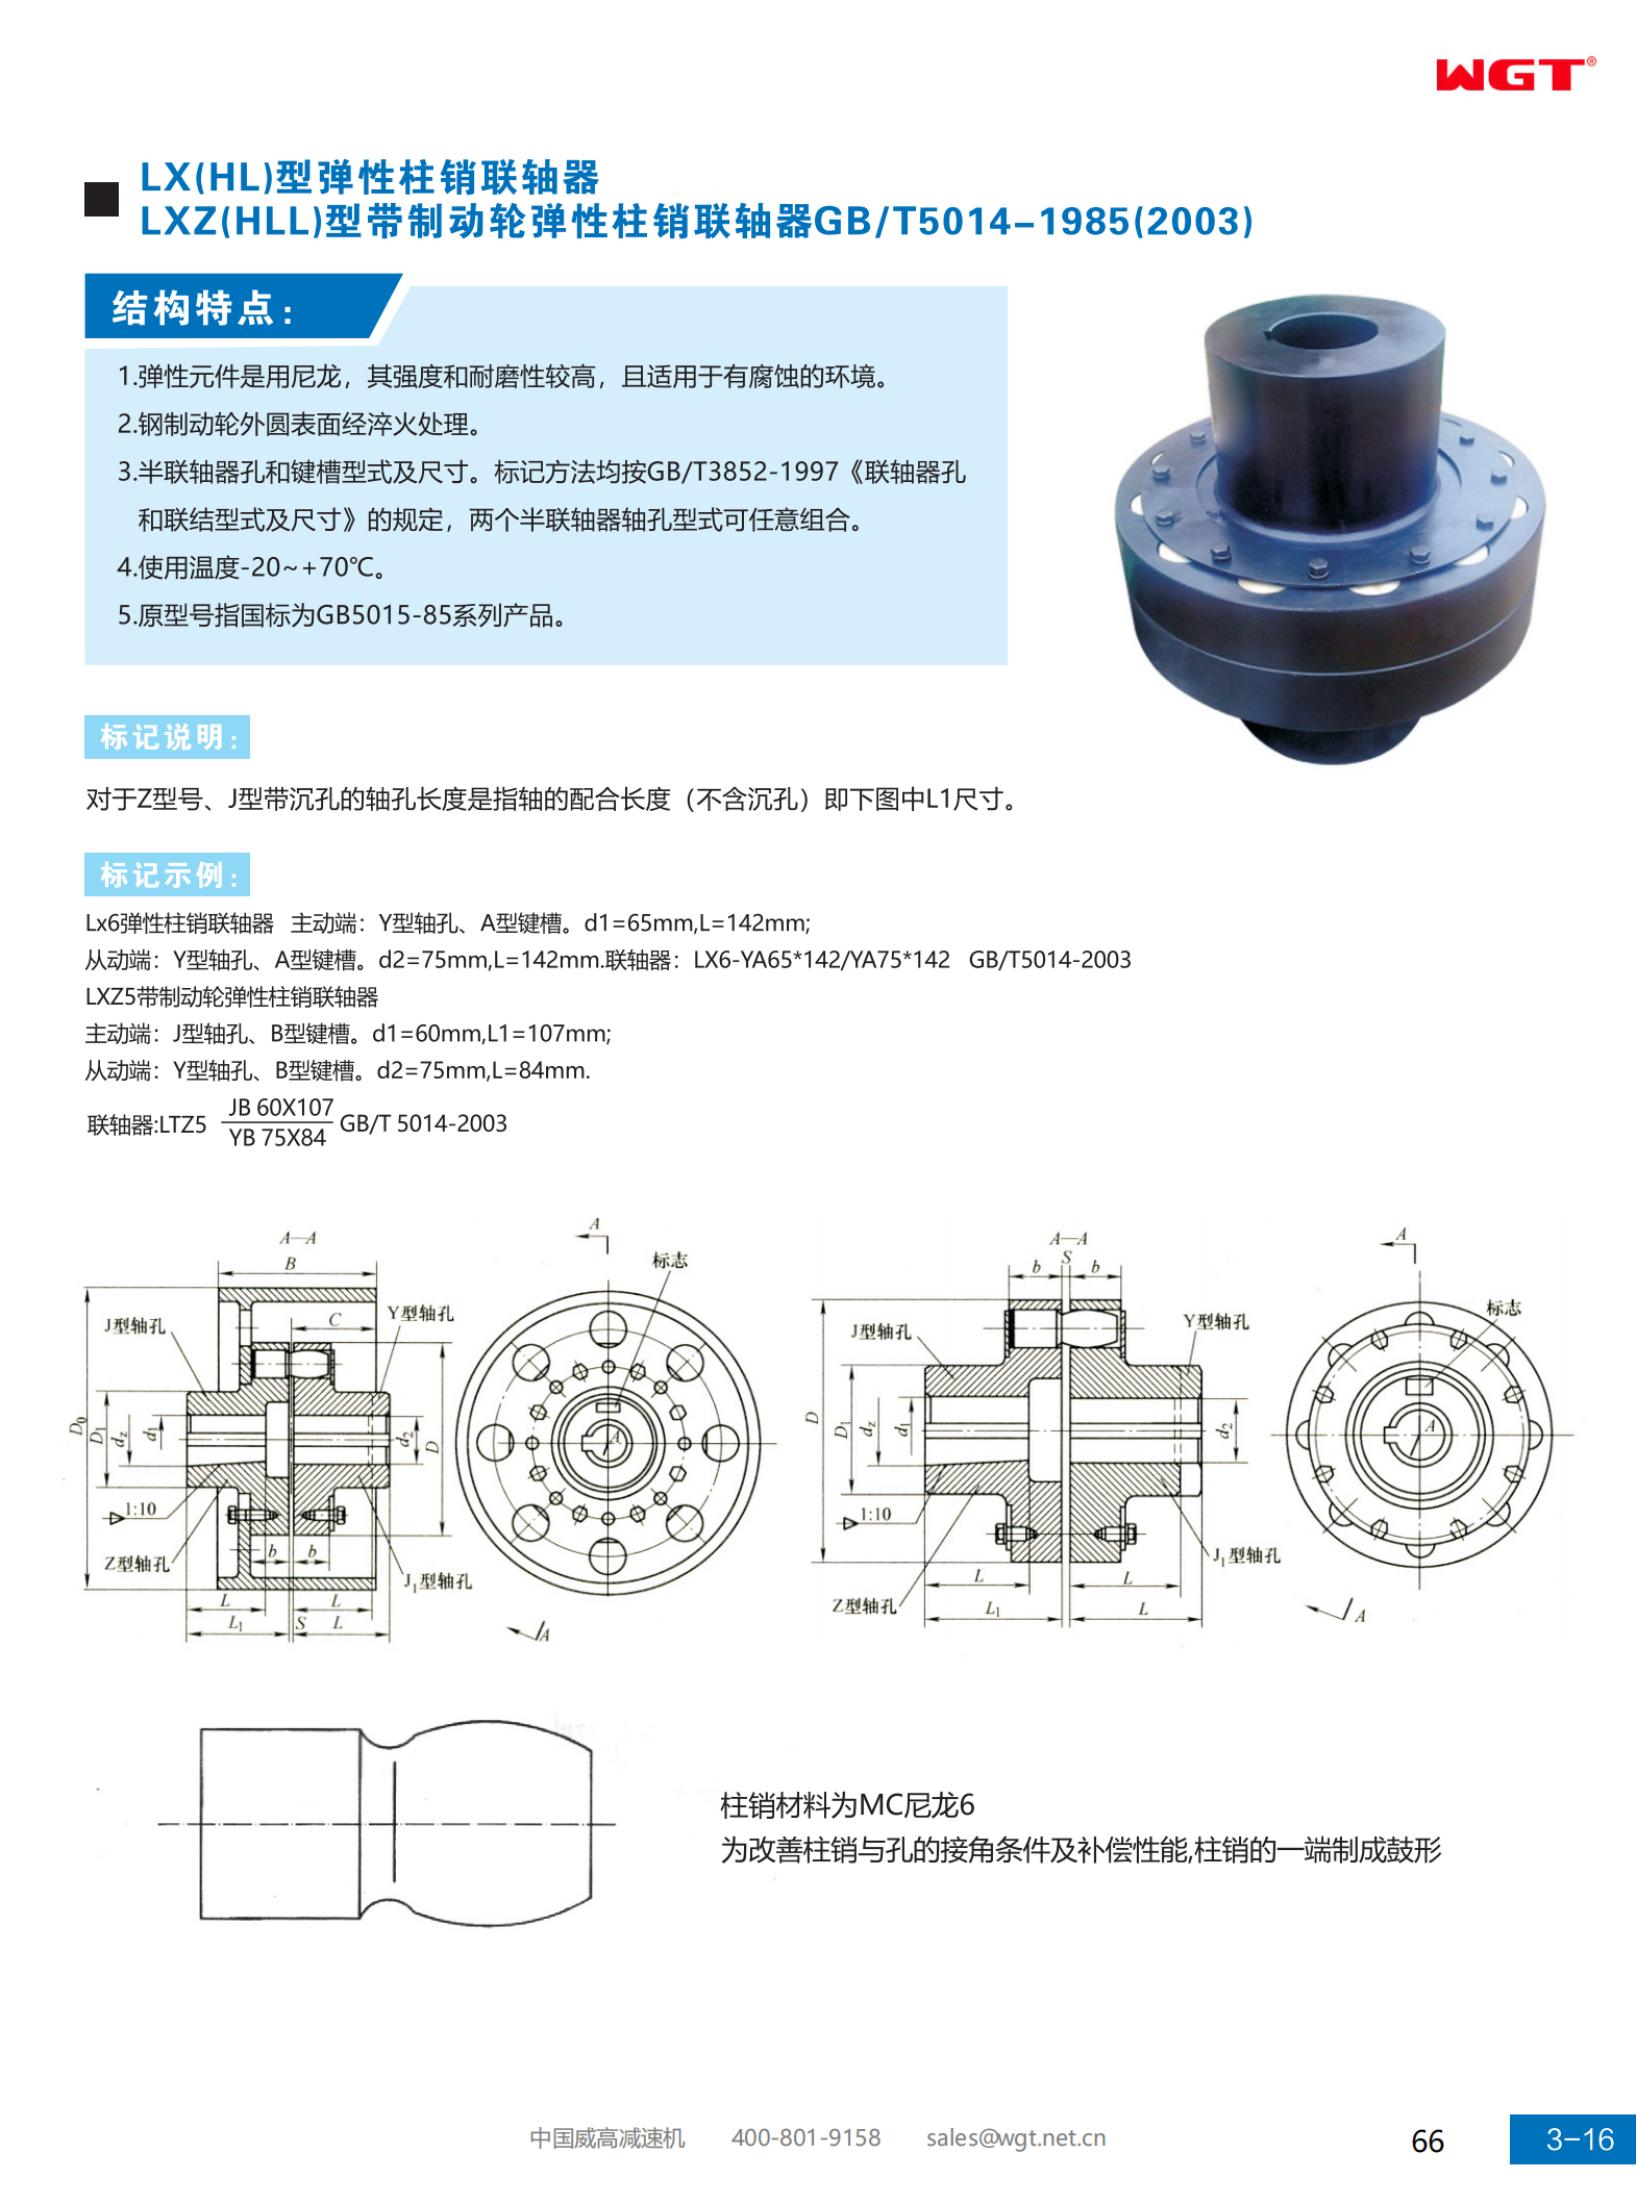 Basic parameters and main dimensions of LX (HL) type elastic pin coupling GB/T5014-1985 (2003)